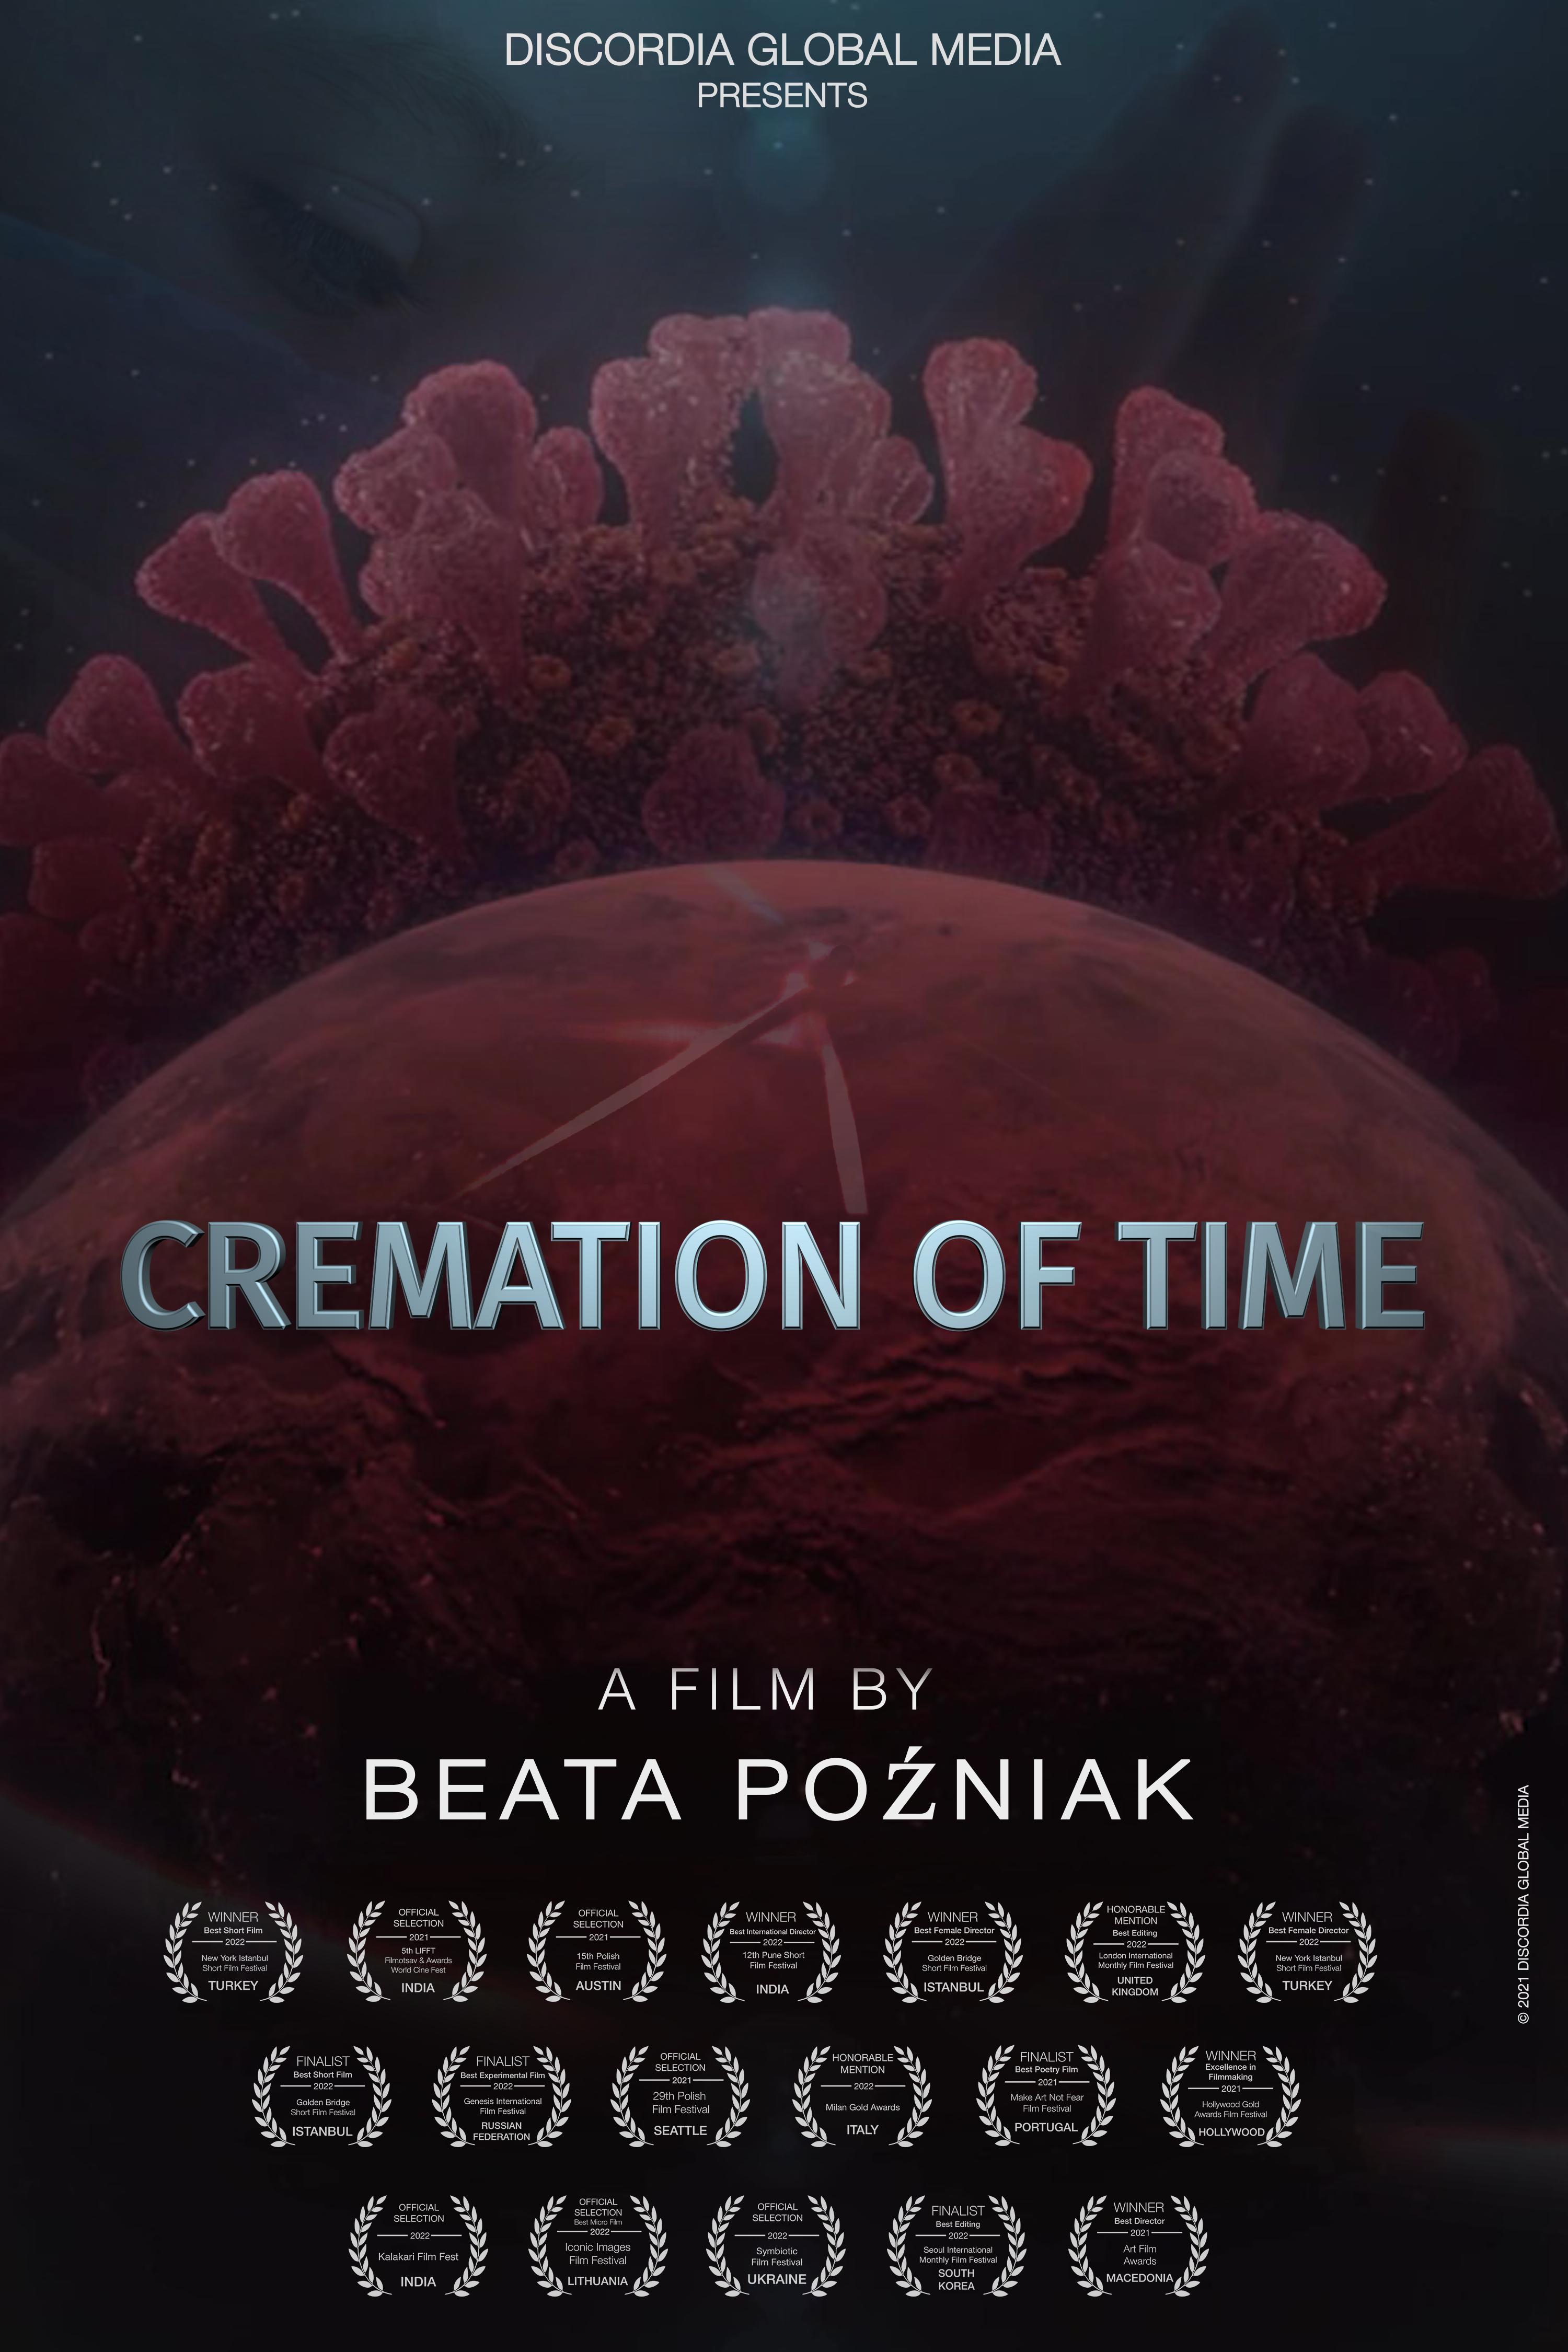 Cremation of Time